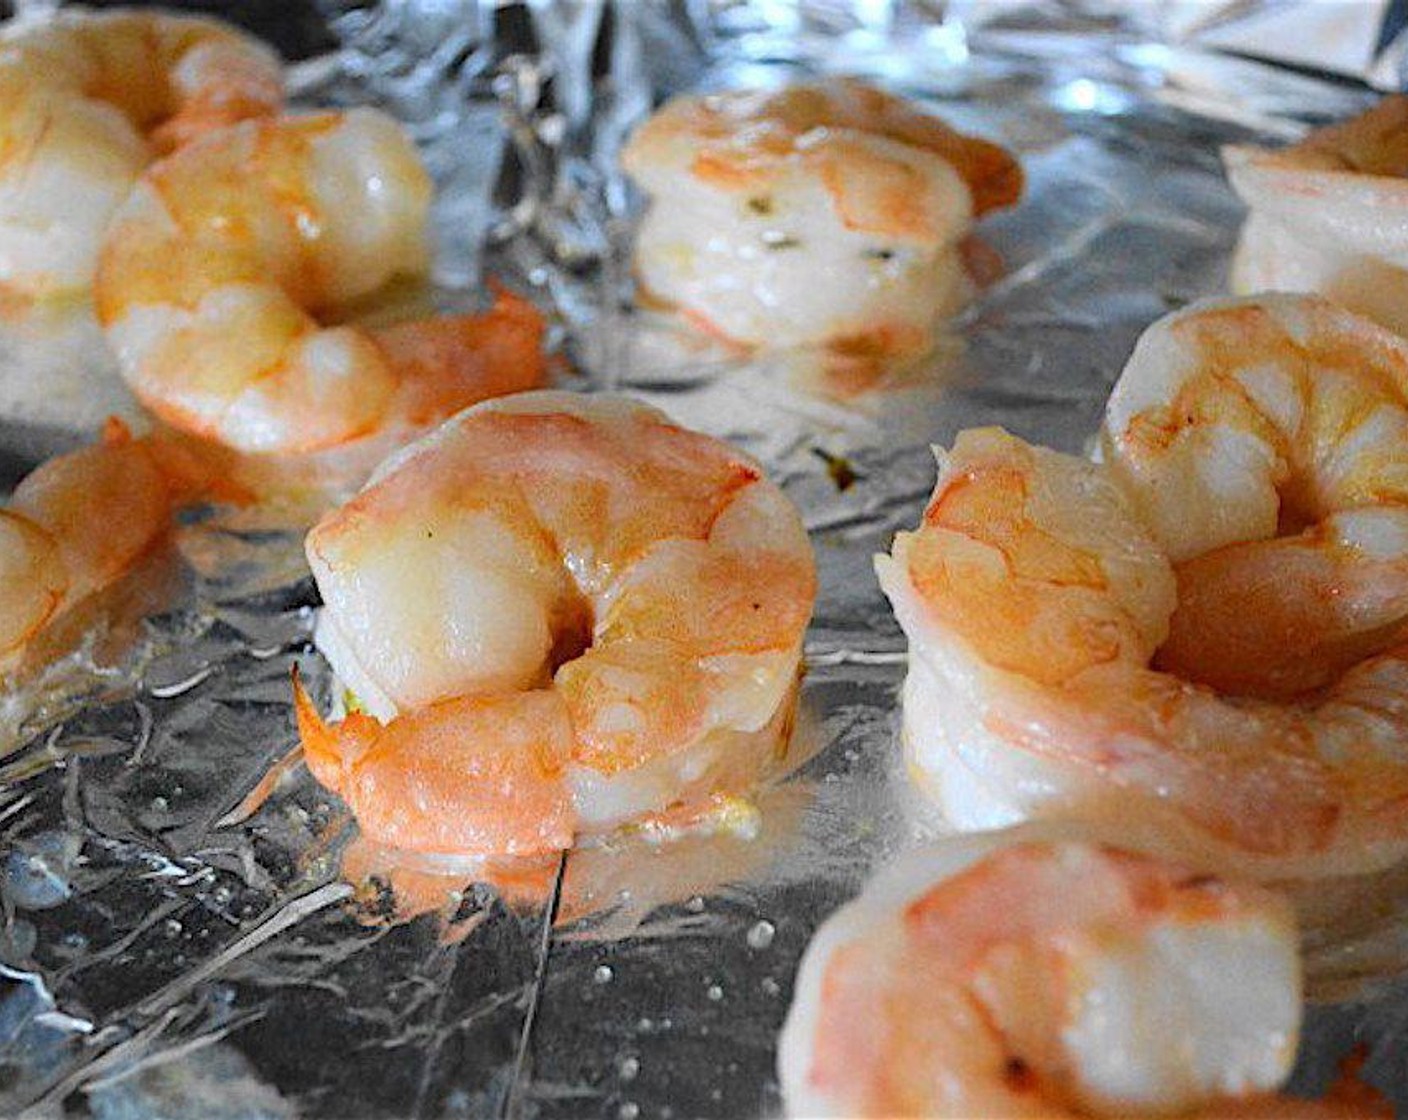 step 2 Lay Shrimp (1 lb) out on the sheet and toss them well with a generous sprinkle of Salt (to taste) and an equally generous drizzle of Olive Oil (as needed).